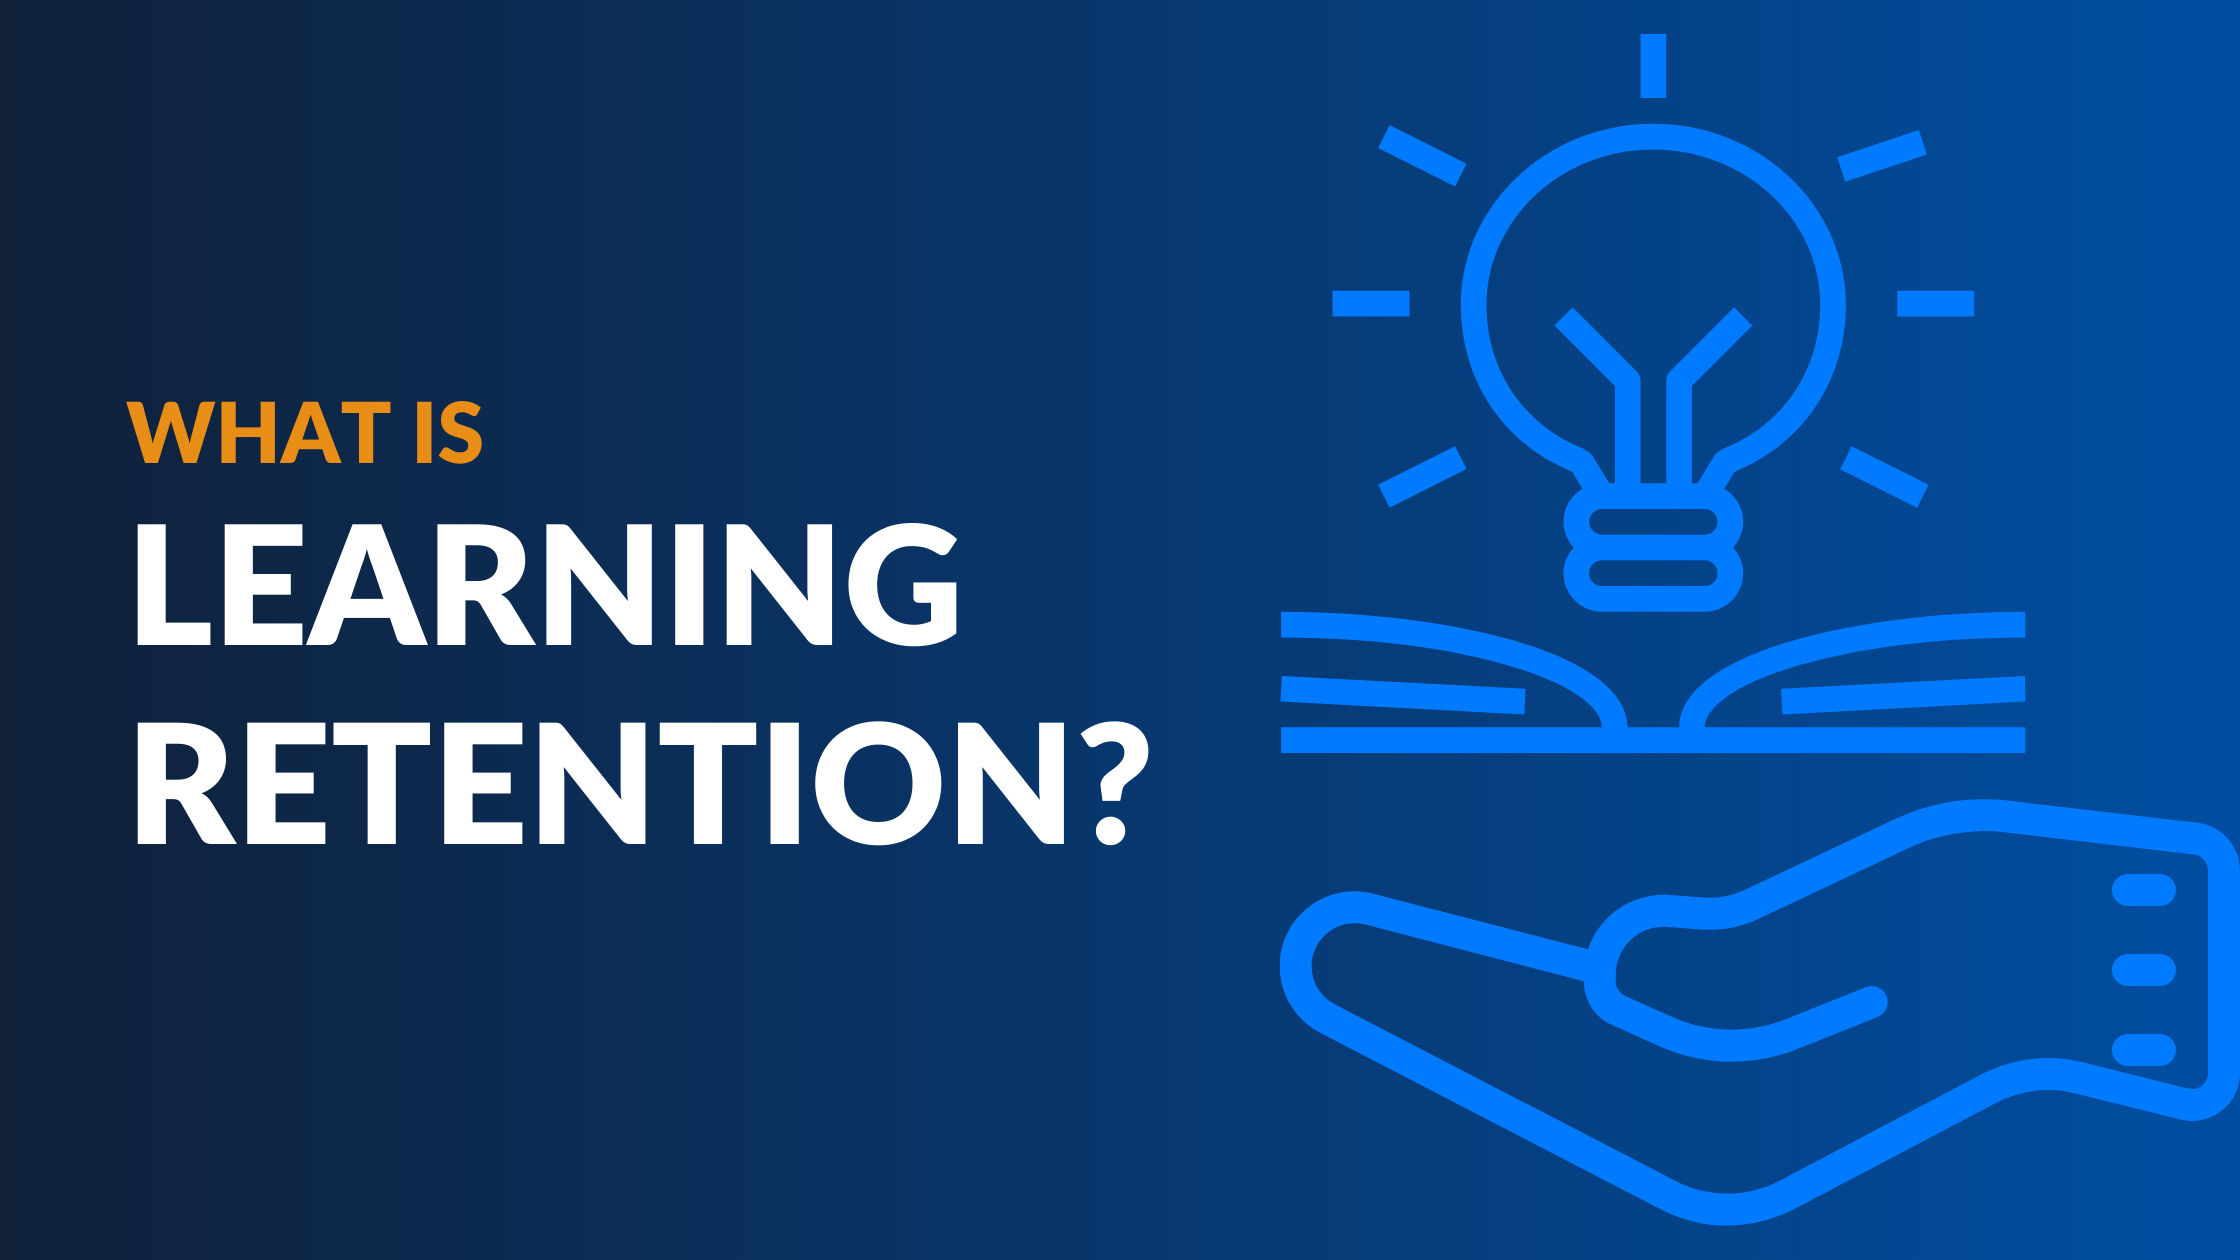 What is Learning Retention?